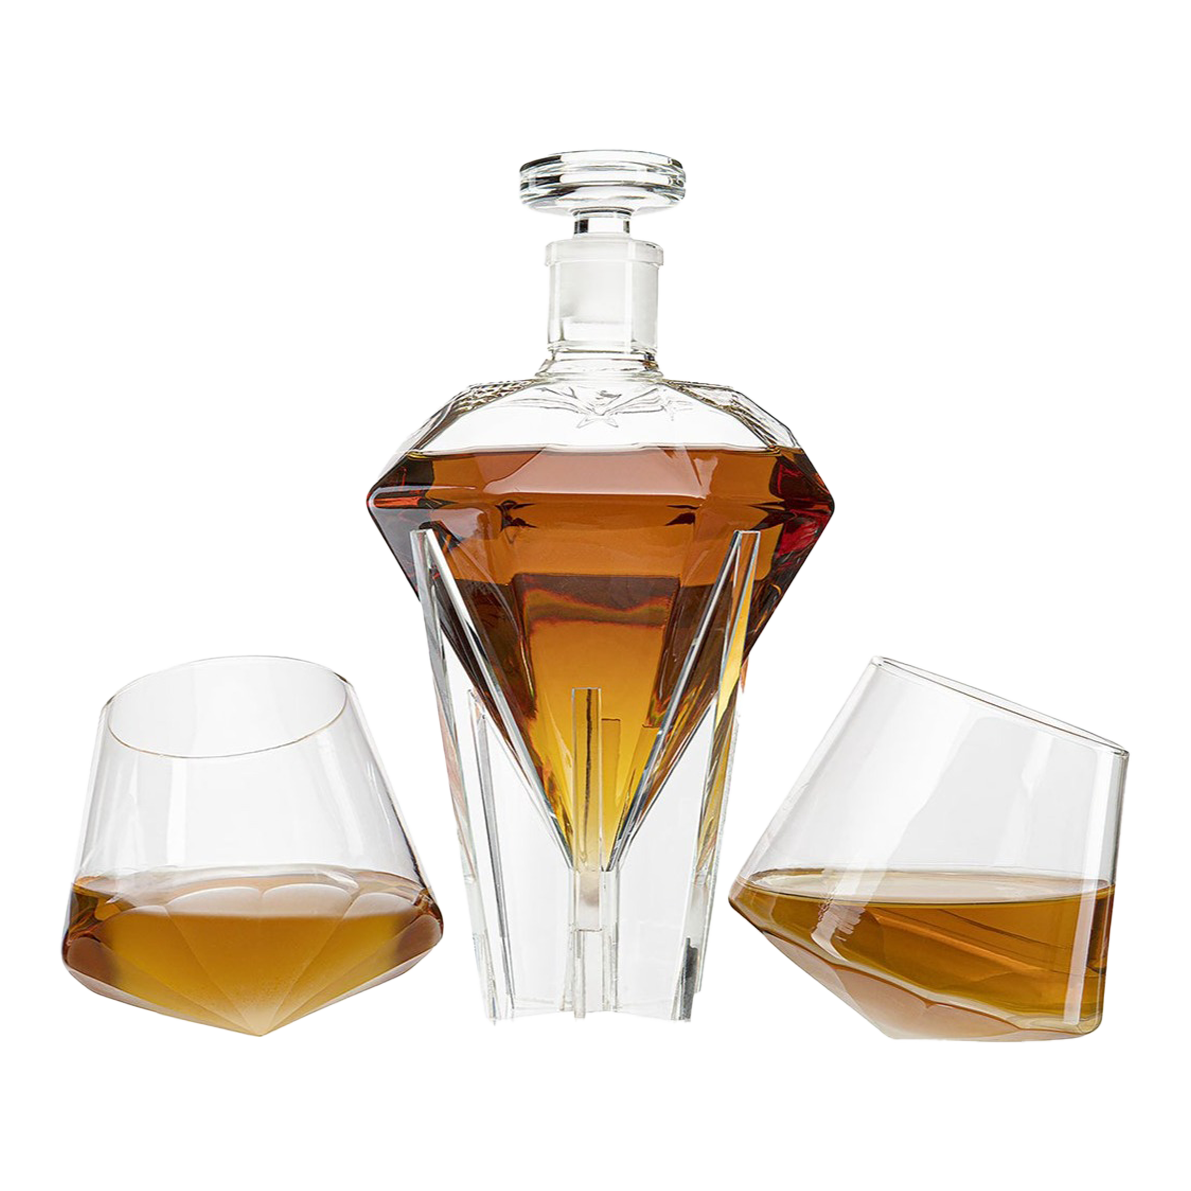 Liquor Lux Diamond Whiskey Decanter l With 2 Diamond Glasses Decanter Set, Diamond Wine Glass Holding Base With 2 Diamond Glasses Liquor, Scotch, Rum, Bourbon, Vodka, Tequila